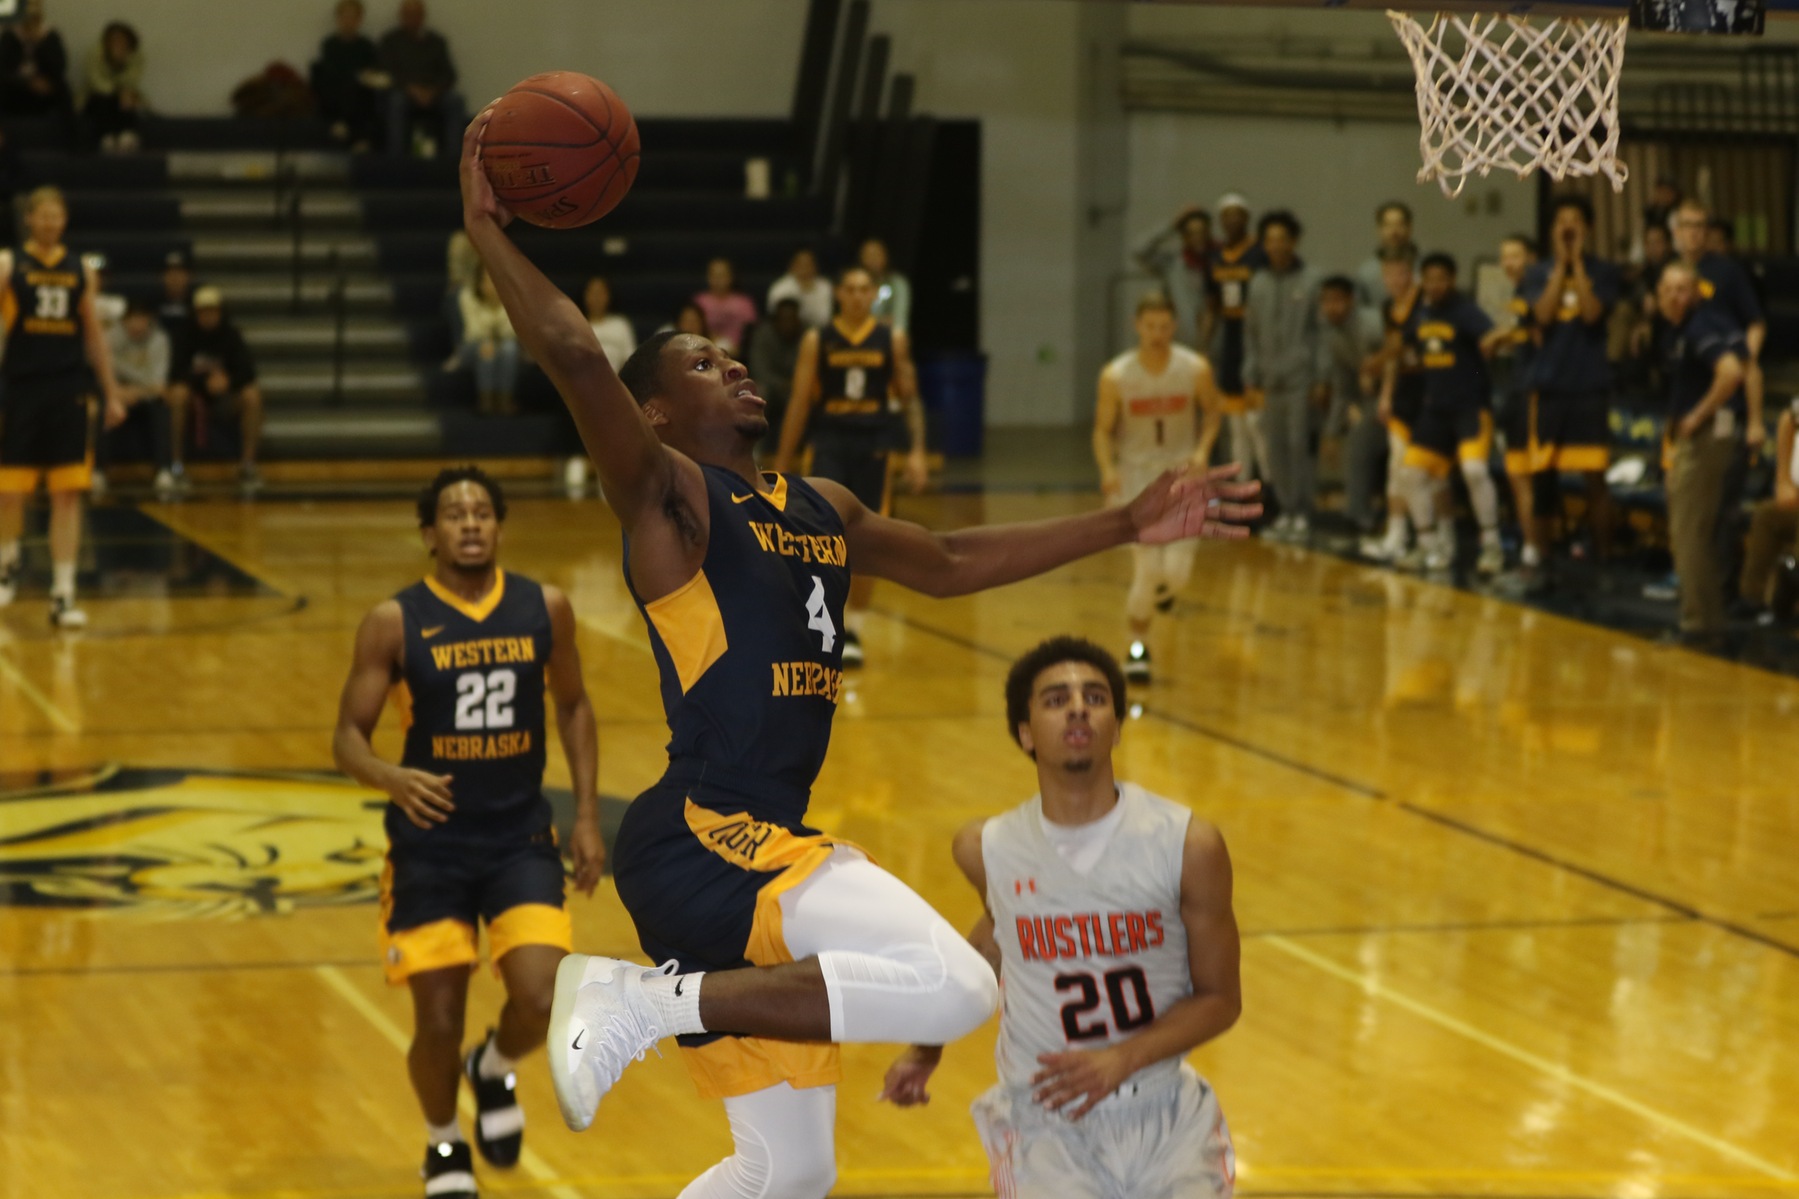 WNCC runs past Central Wyoming